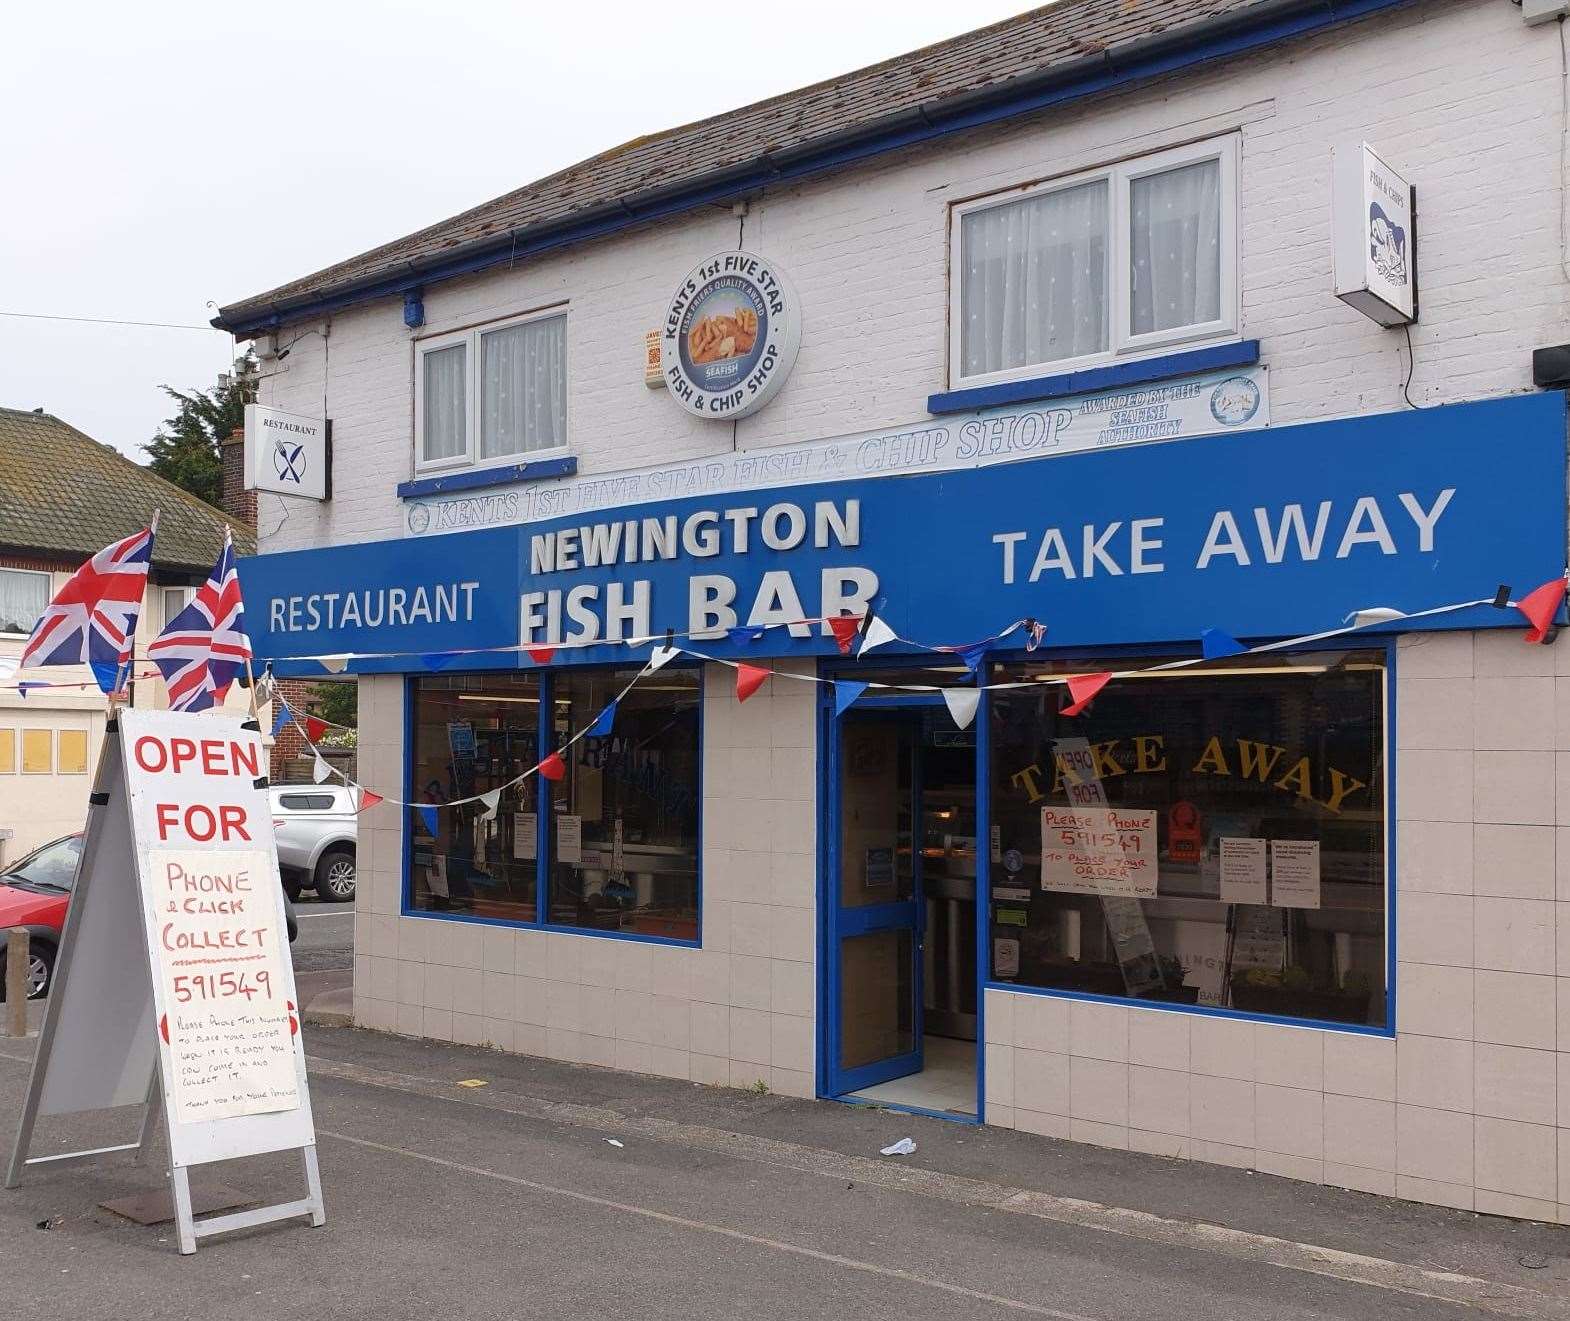 Newington Fish Bar was Thanet's only representative in the annual top 50 best fish and chip shops